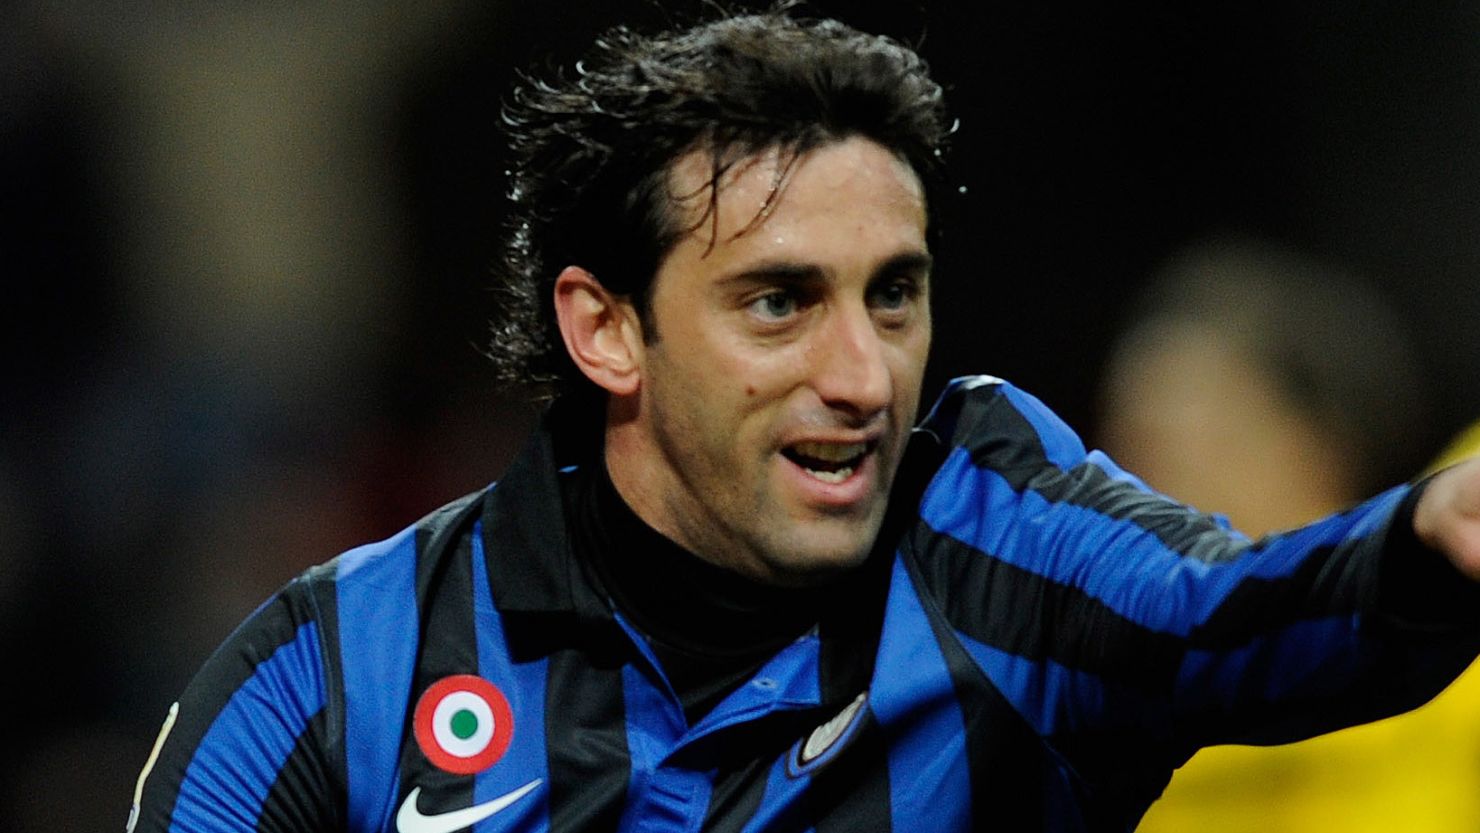 Diego Milito scored twice as Inter ended a Juventus unbeaten run stretching 49 games.